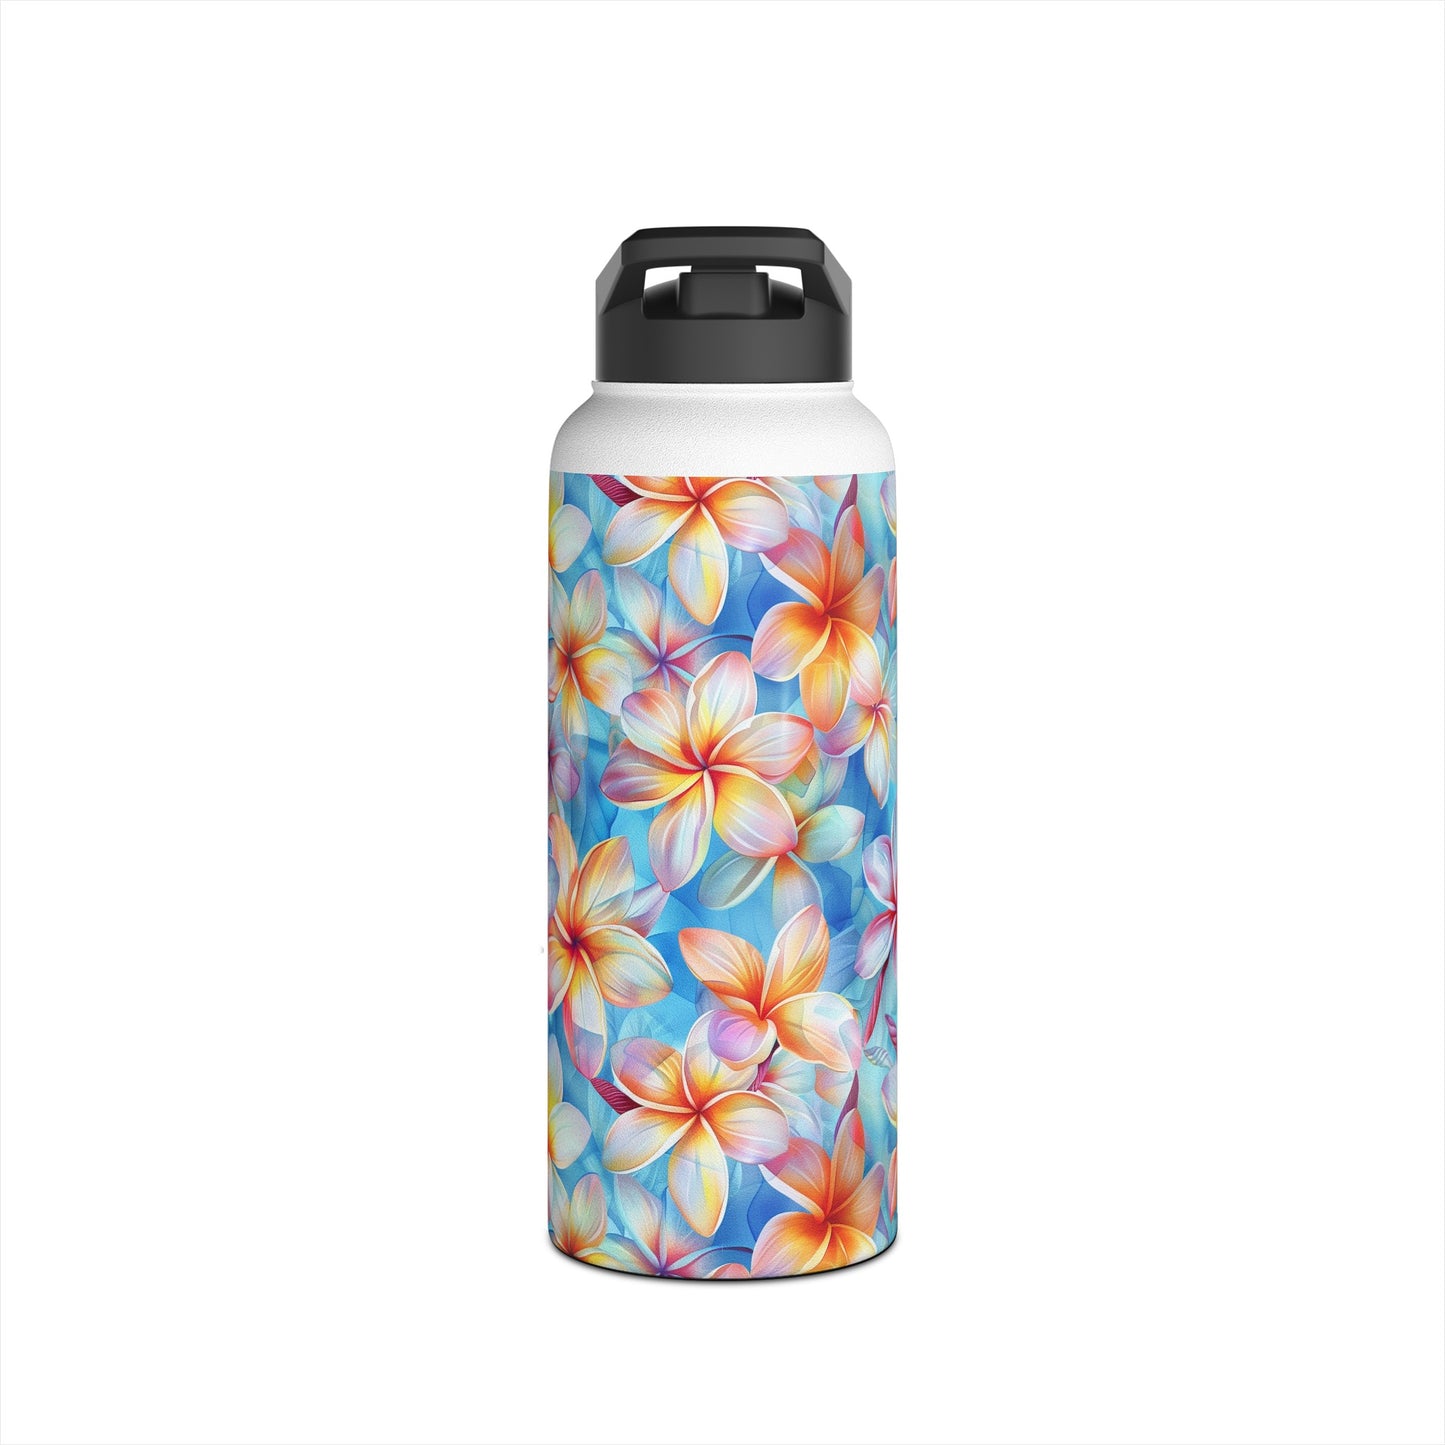 Stainless Steel Water Bottle Thermos, 32oz, Liberty Print Plumeria - Double Wall Insulation Keeps Drinks Hot or Cold